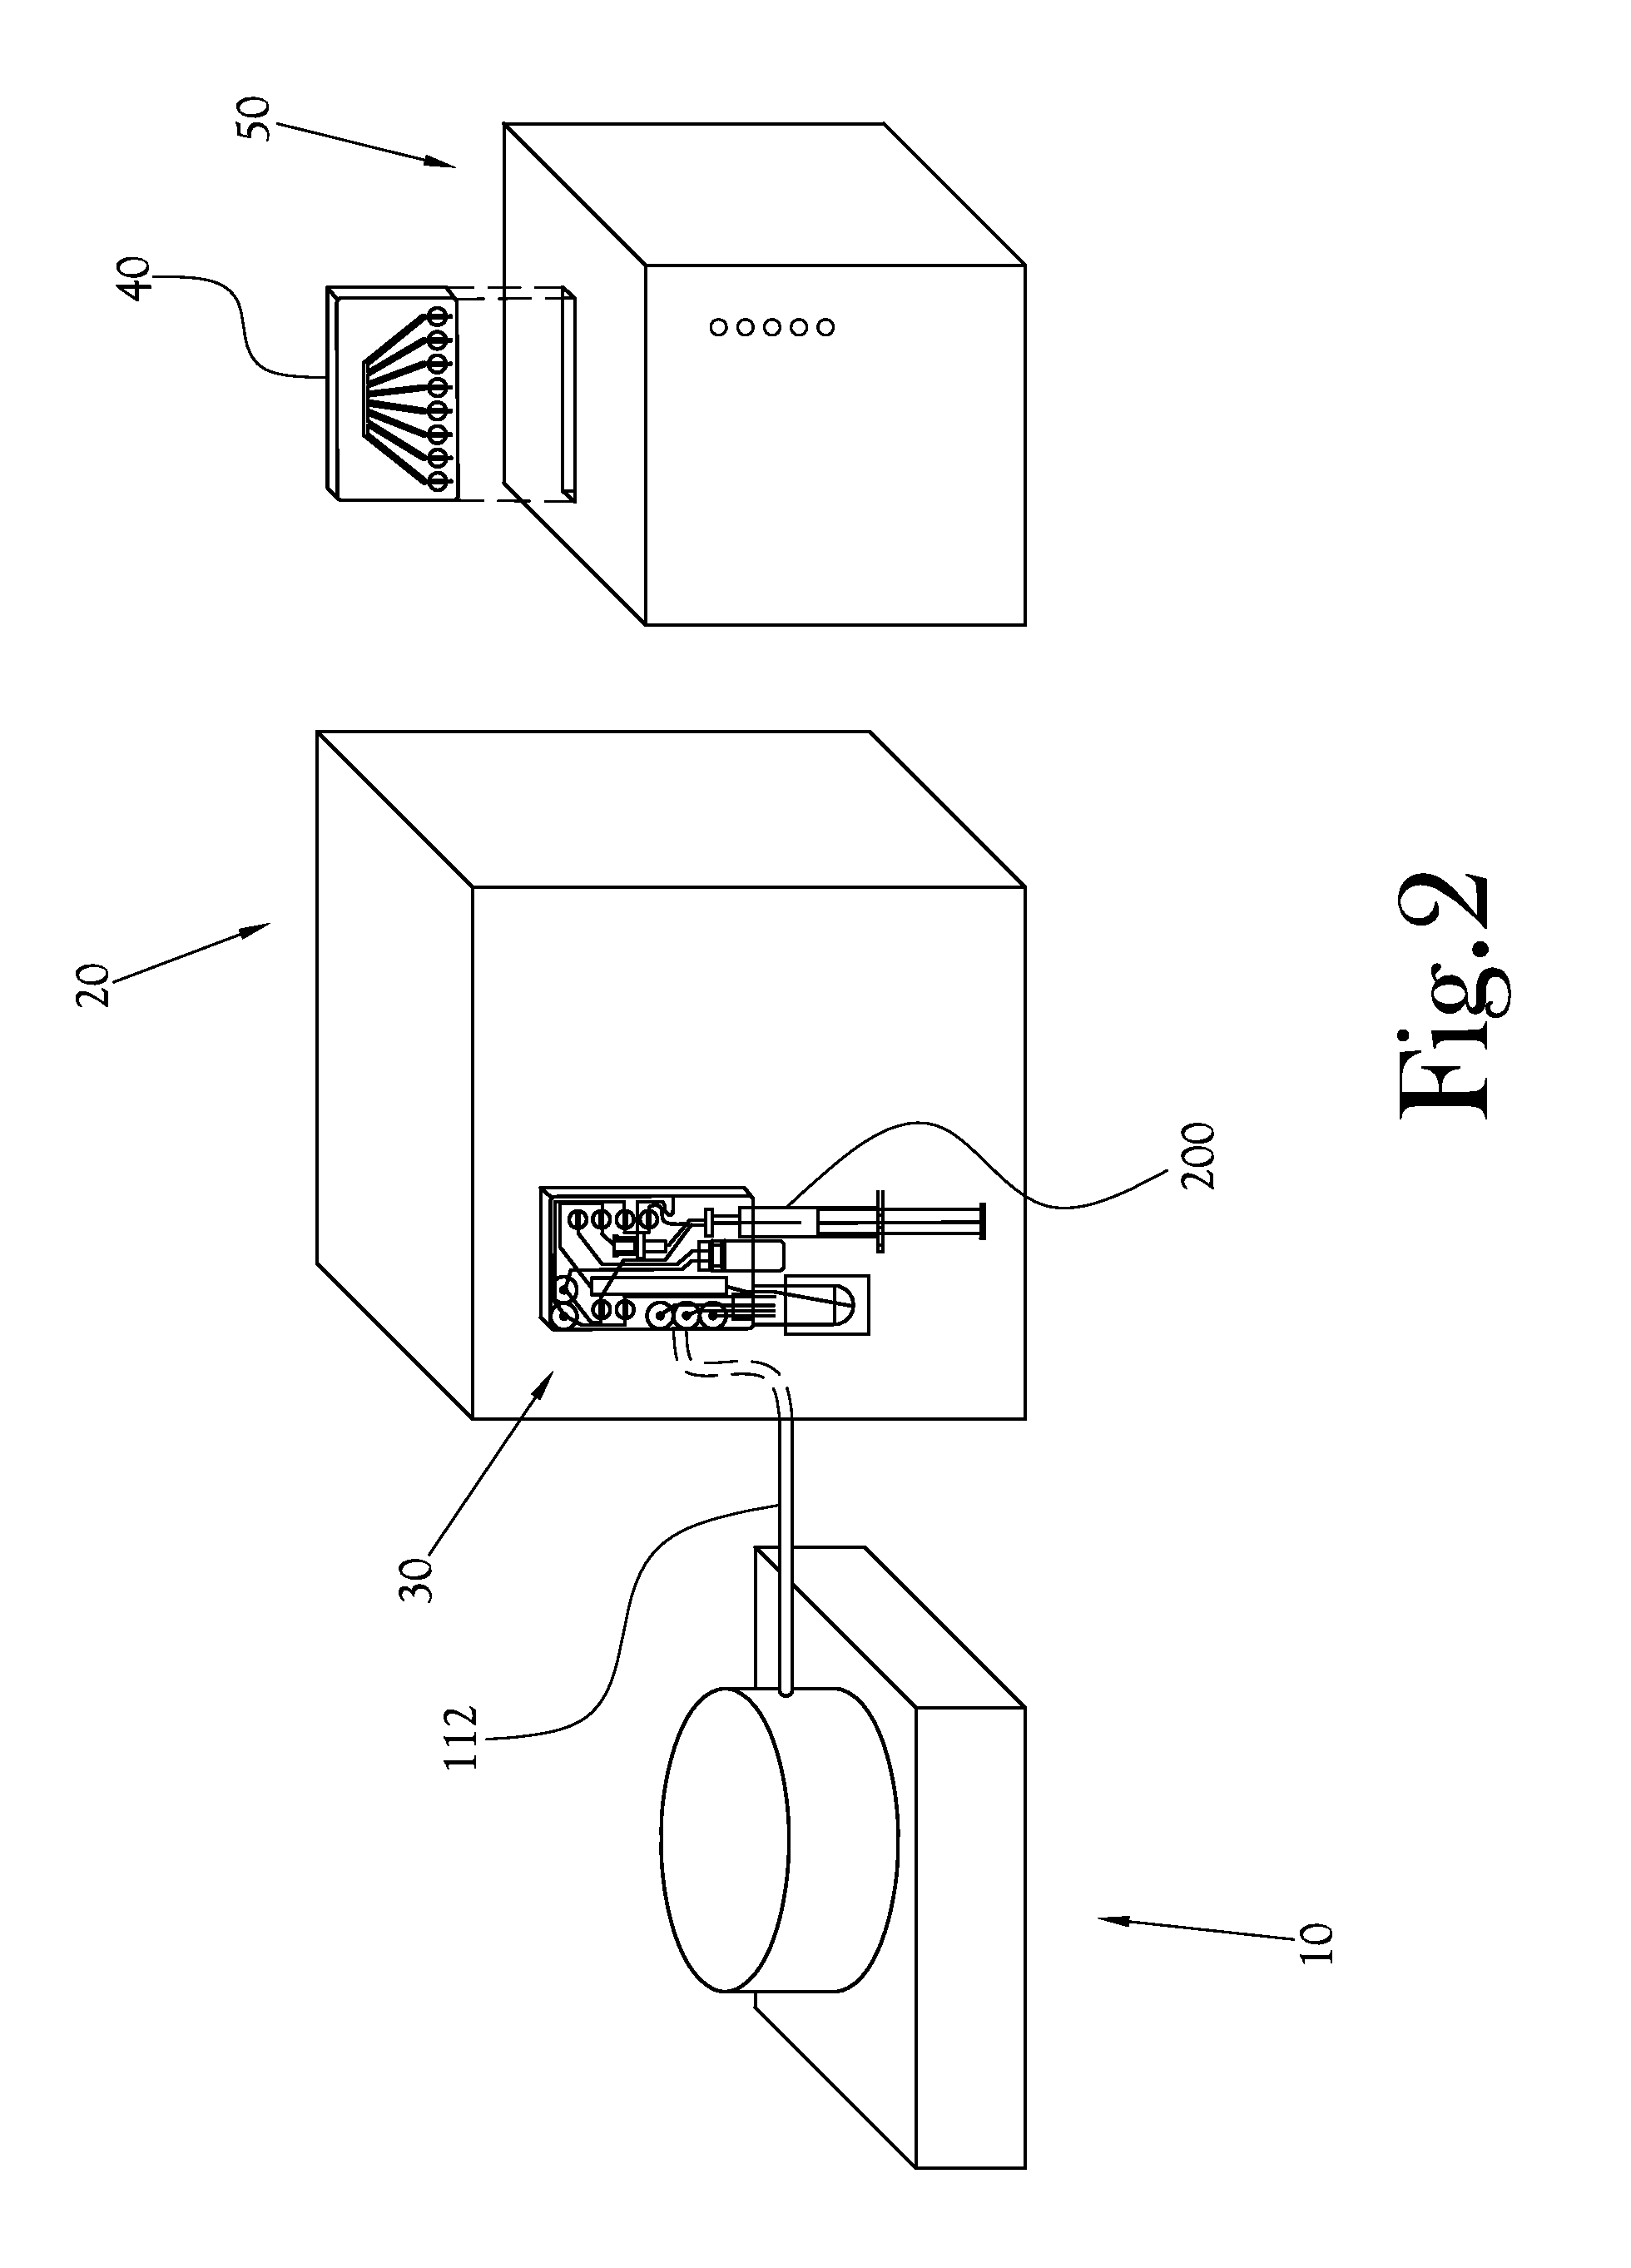 Dose Synthesis Card for Use with Automated Biomarker Production System